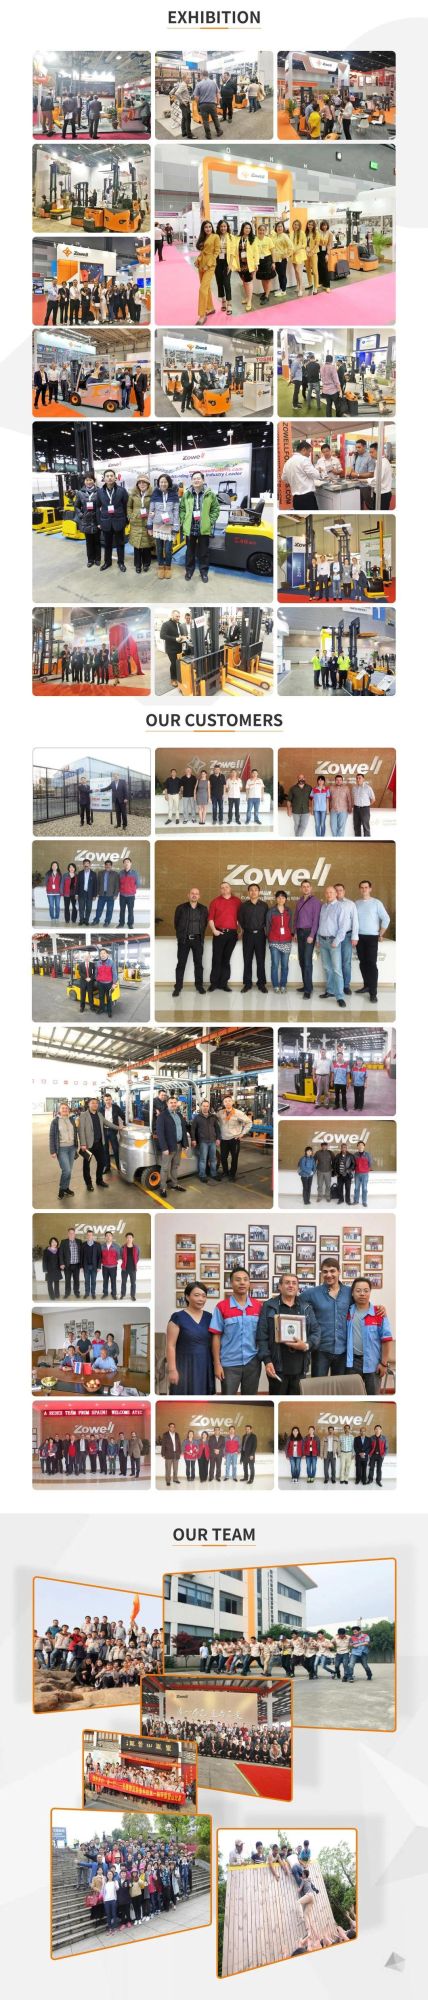 Zowell New Electric Sitting on Type Towing Tractor Can Be Customized ISO9001 CE Lithium Battery Curtis Controller Hook Pin Optional